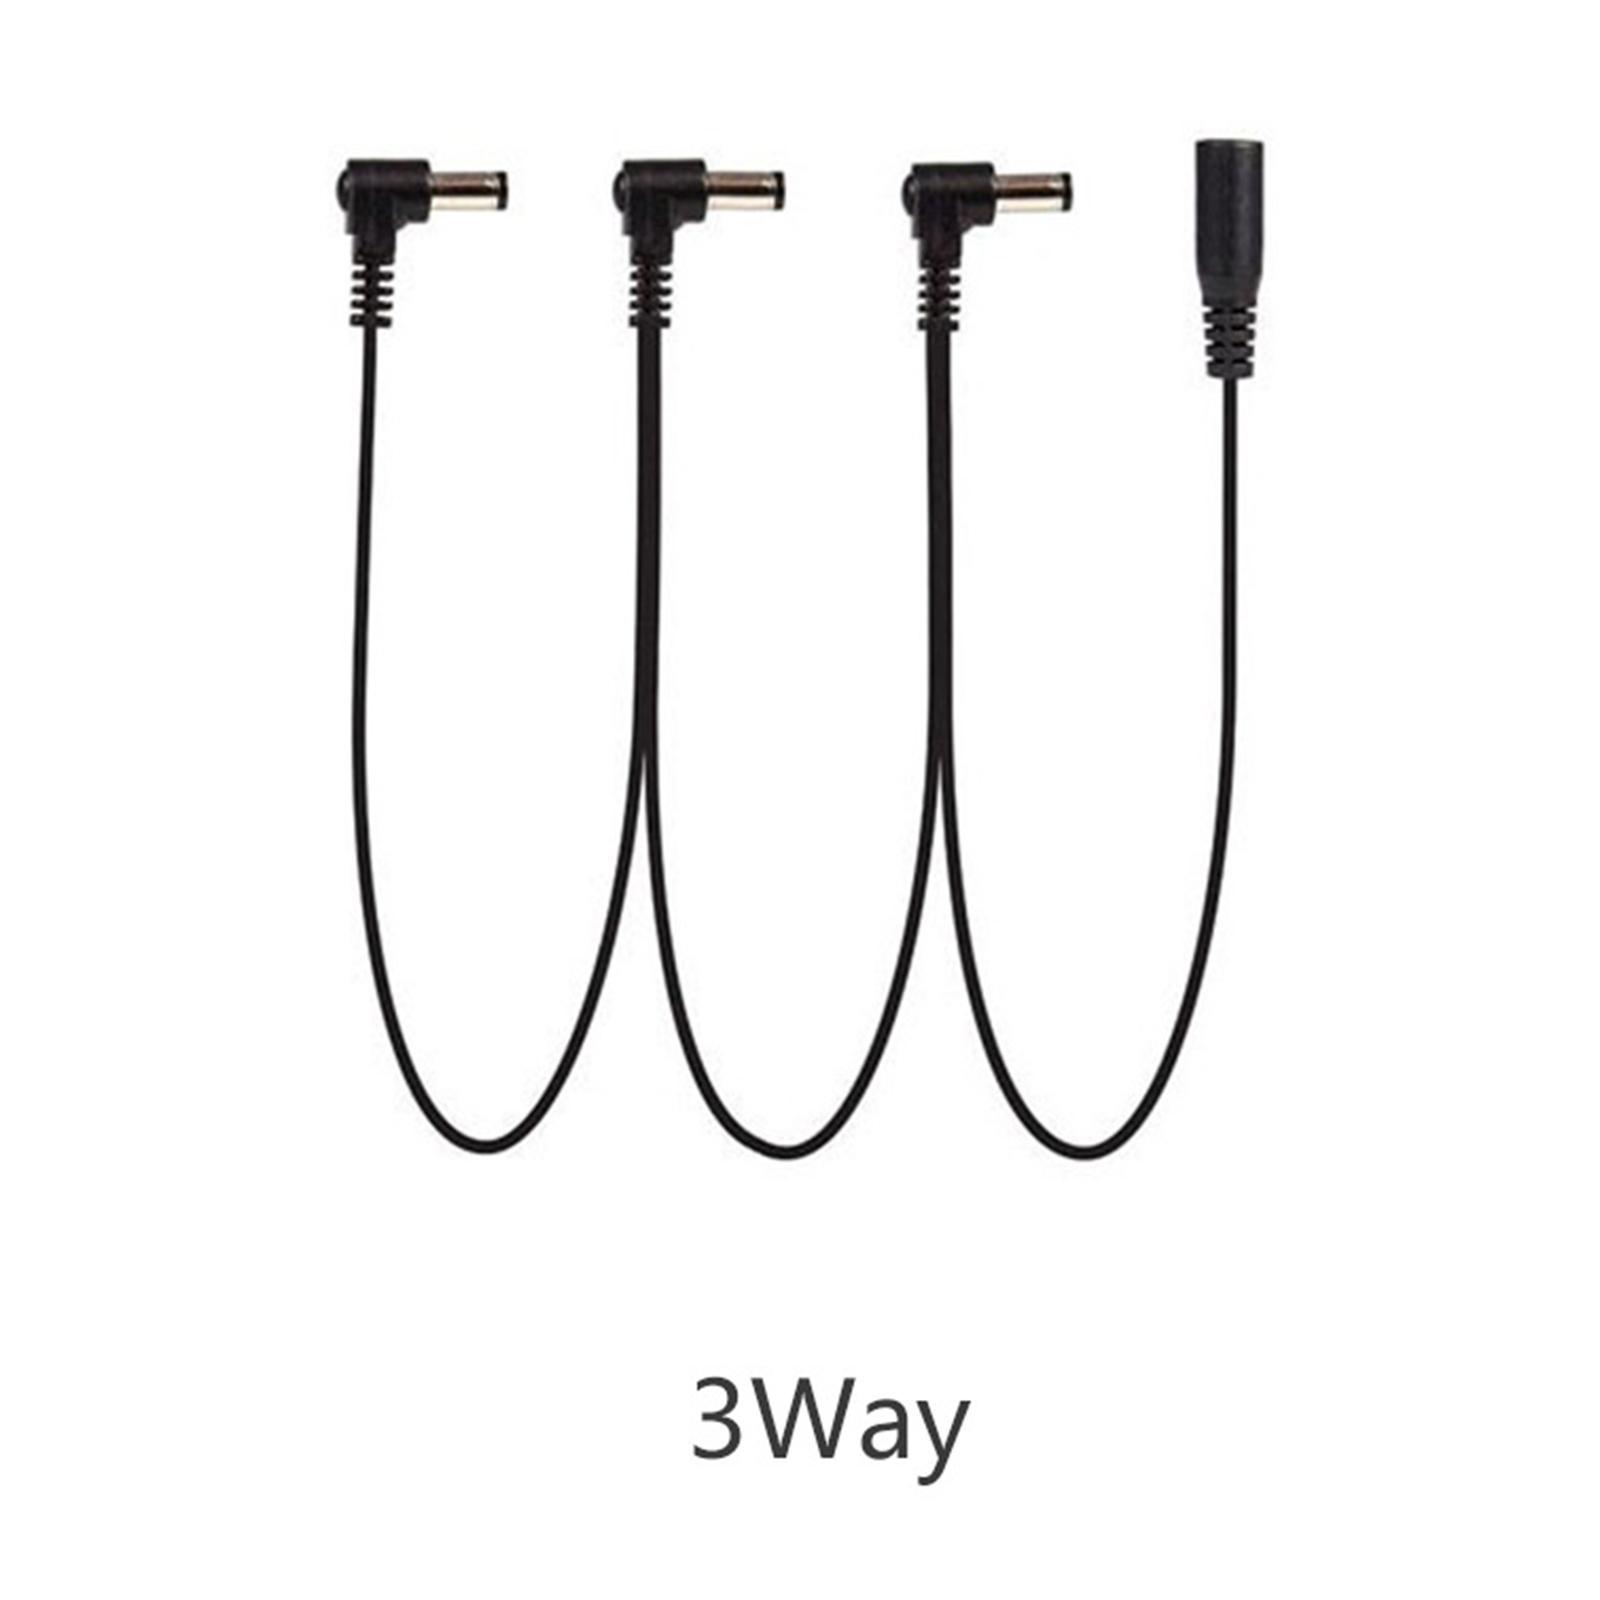 Daisy Chain Power Cable ,Electric Guitar Effect Pedal Cables Bass Patch Wire Cable Effector Power Cord for Speaker Systems, Keyboard Amplifier